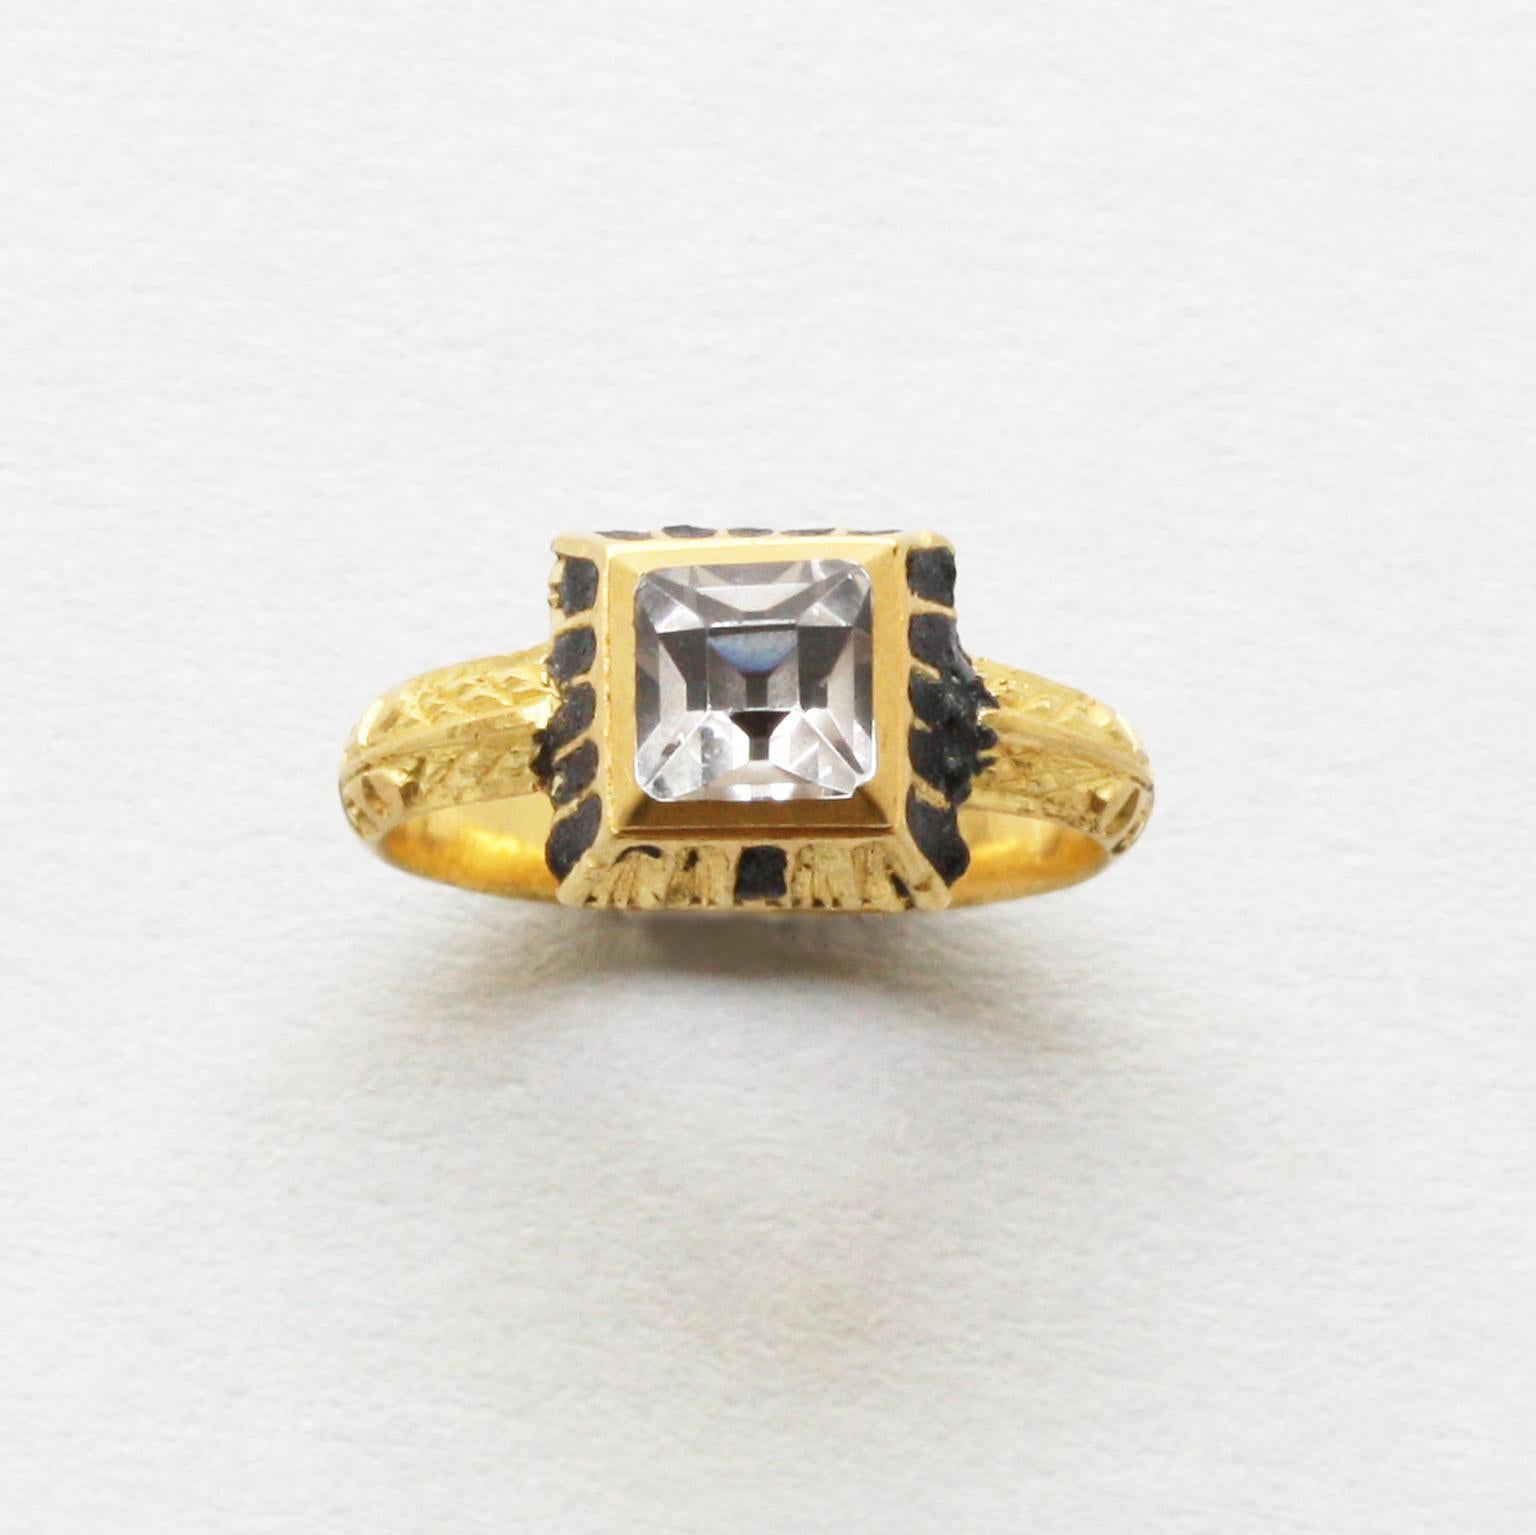 A gold ring set with a table cut rock crystal in a box setting which sides are decorated with black enamel and scrolls on the shank, marked with a star, Netherlands, circa 1600.

PAN registration number: 00078640.

ring size: 16.25 mm / 5 ¾